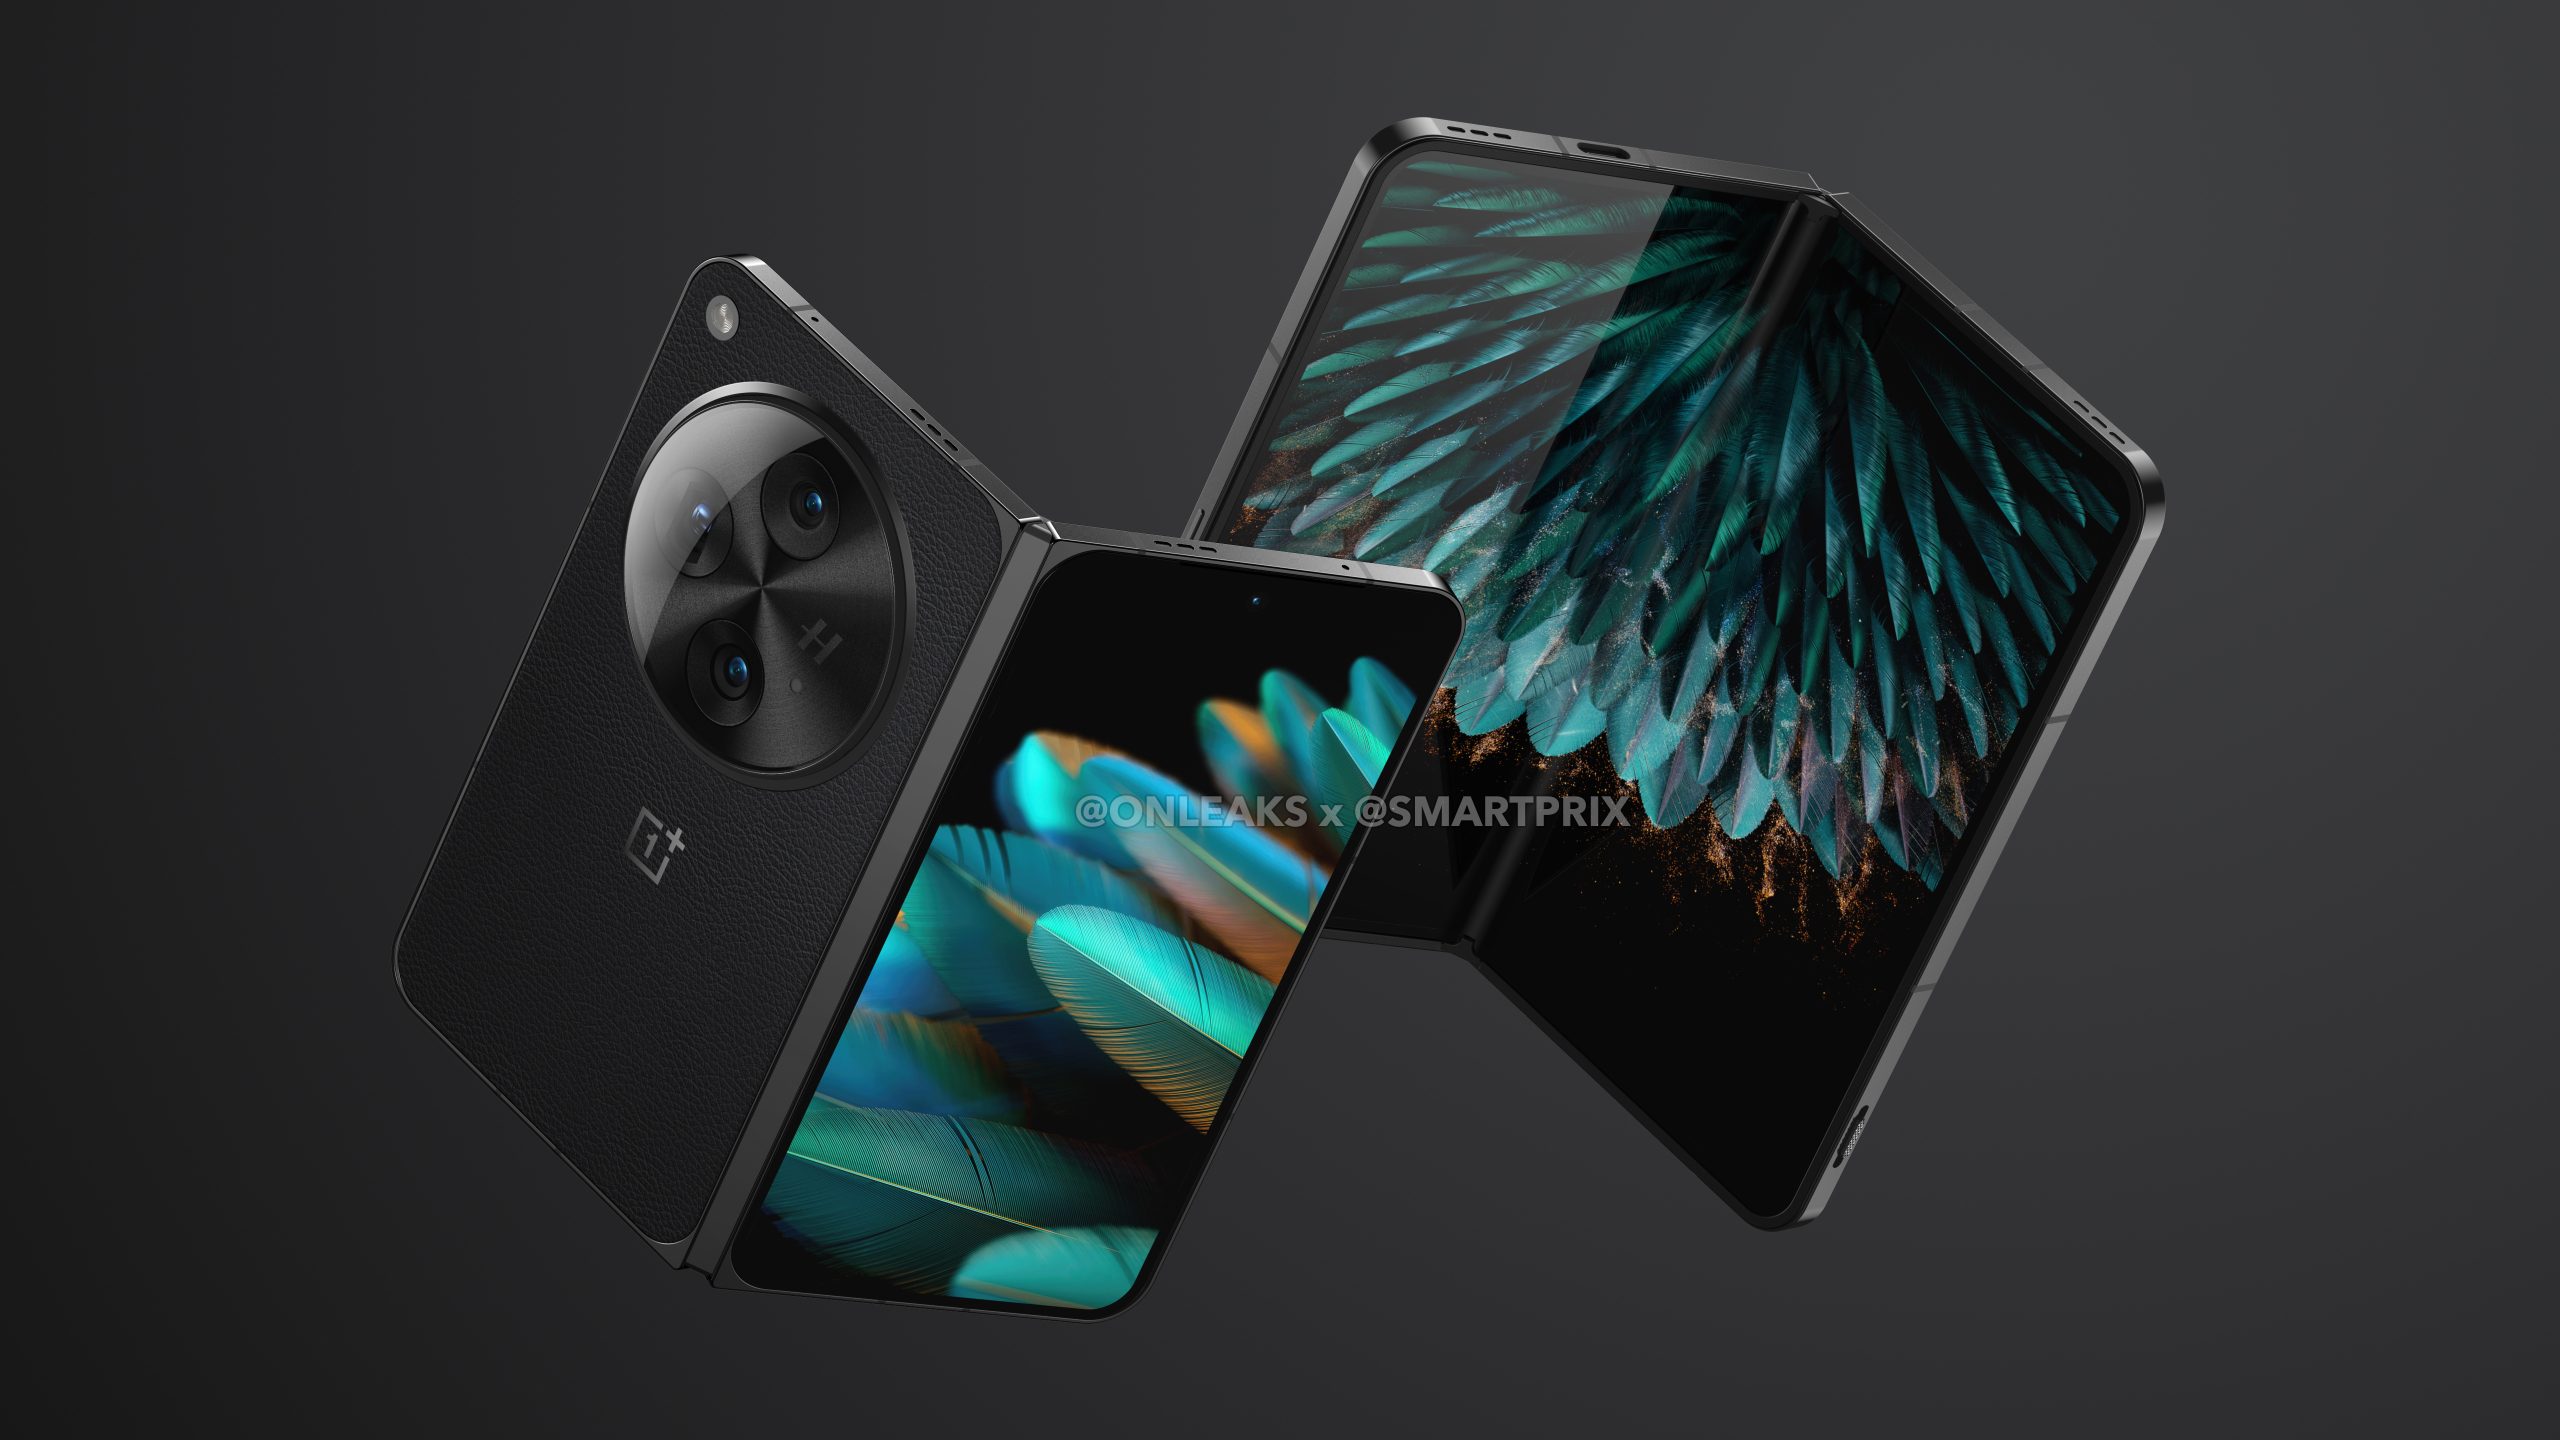 High-quality renders of the OnePlus Open with a giant Hasselblad camera, flat edges and a leather back panel have surfaced online